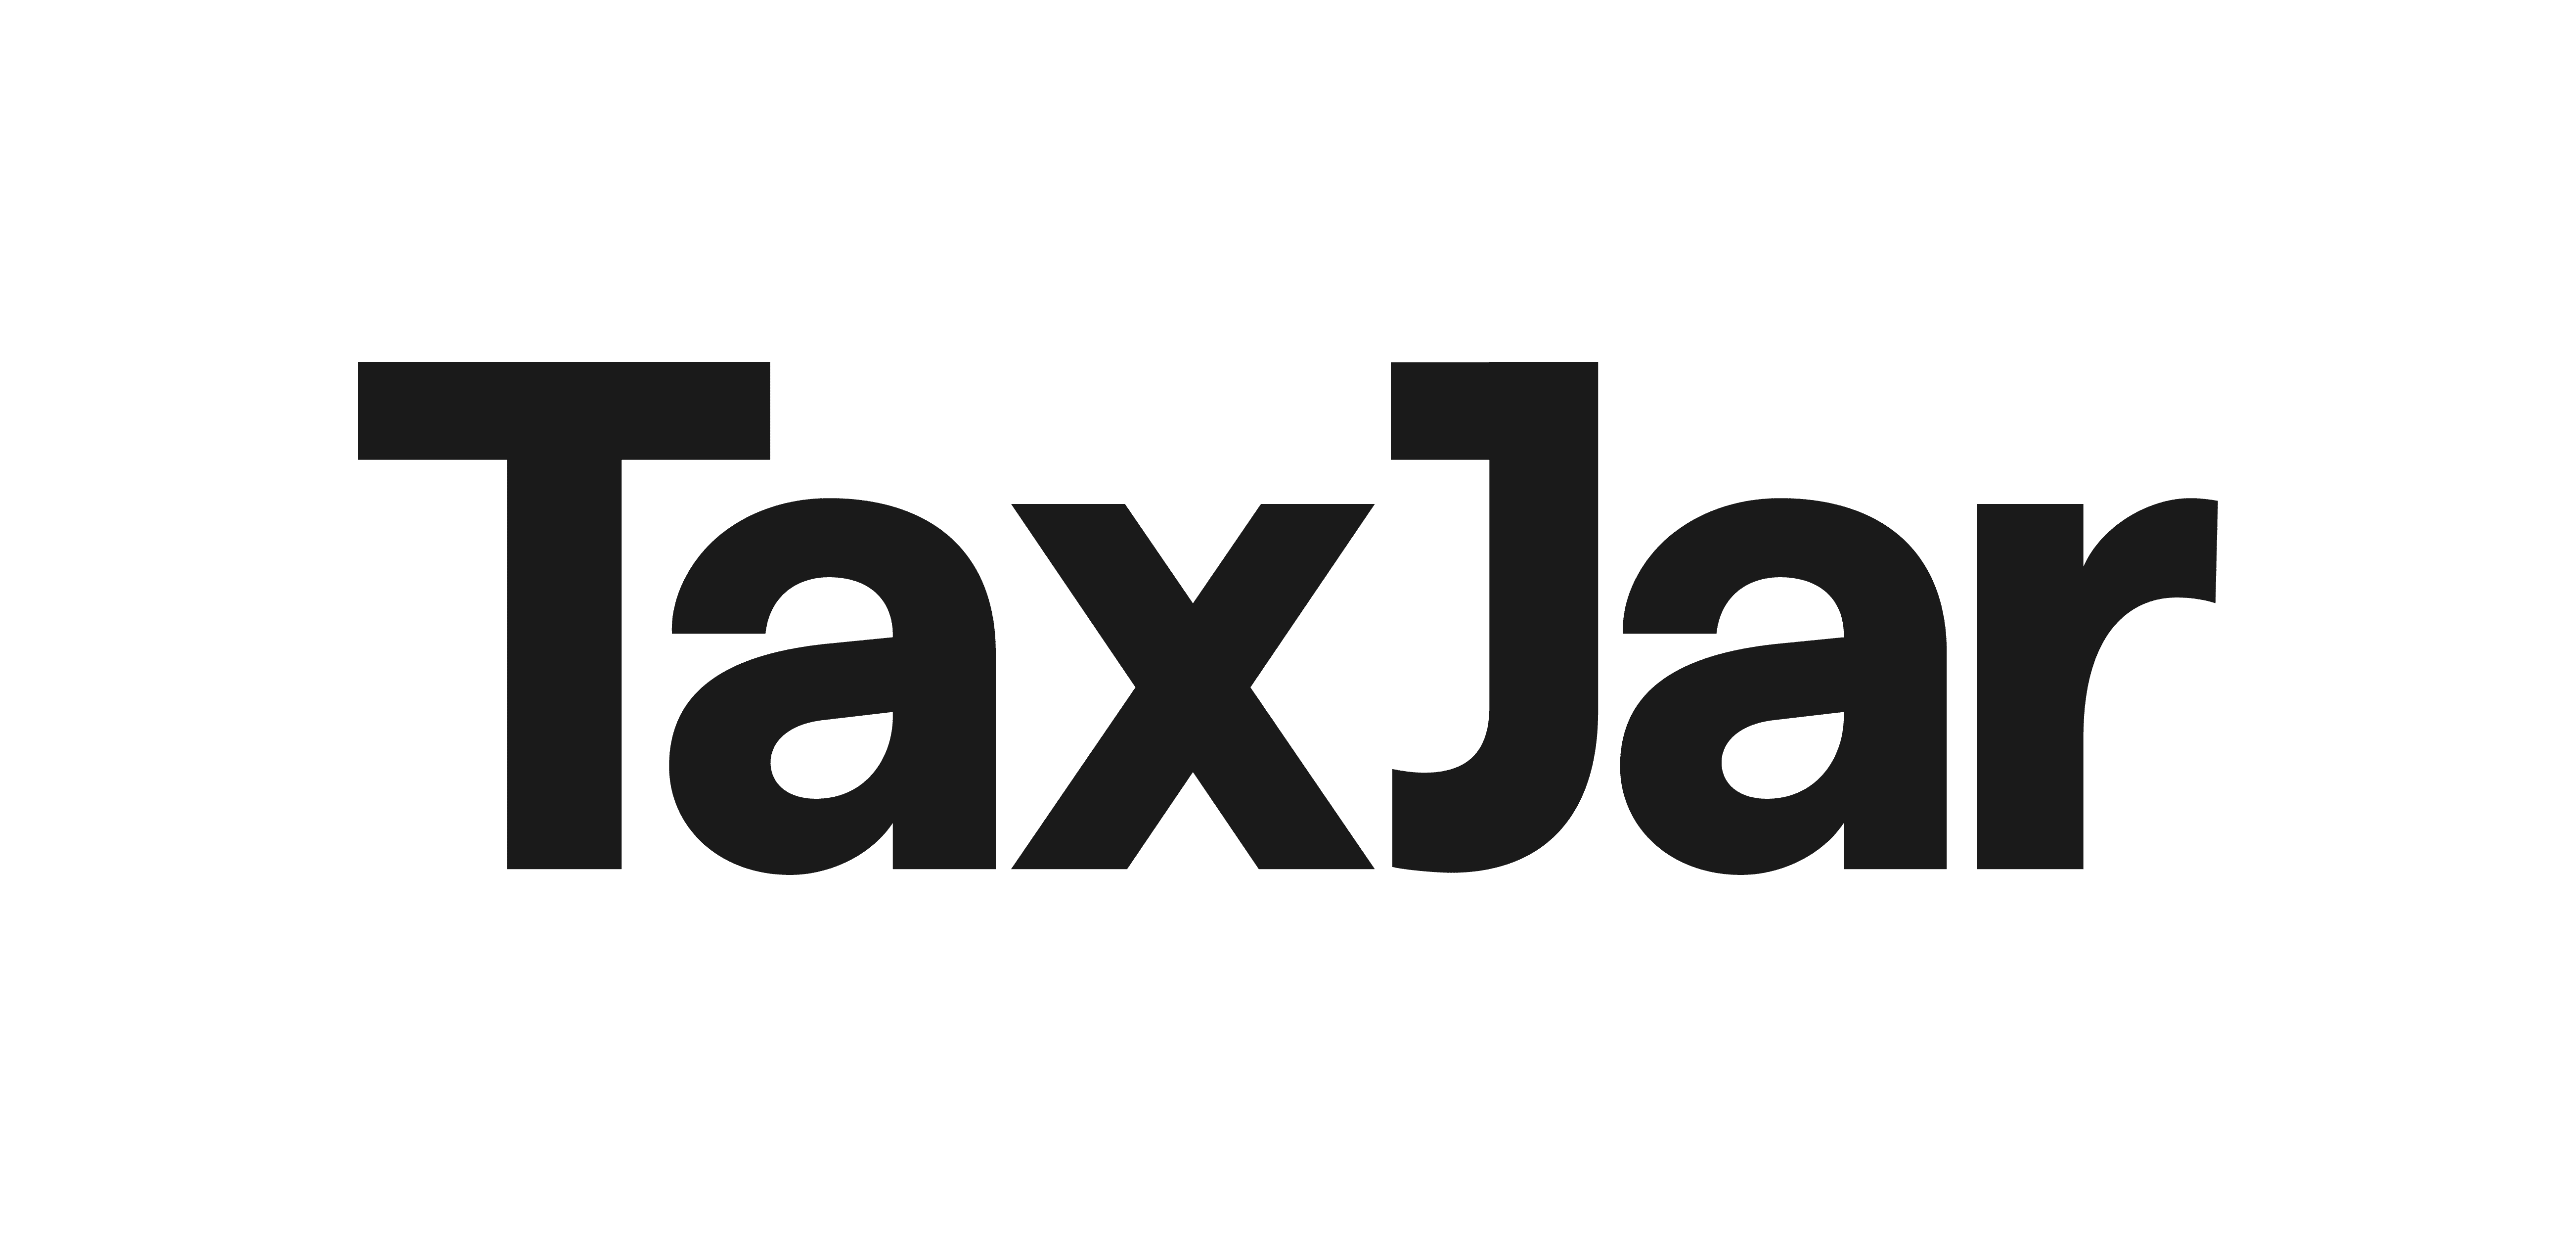 TaxJar has a solution to better manage sales tax when the complexities of sales volume, state nexus, and platform needs have multiplied — all while ensuring cost effectiveness.